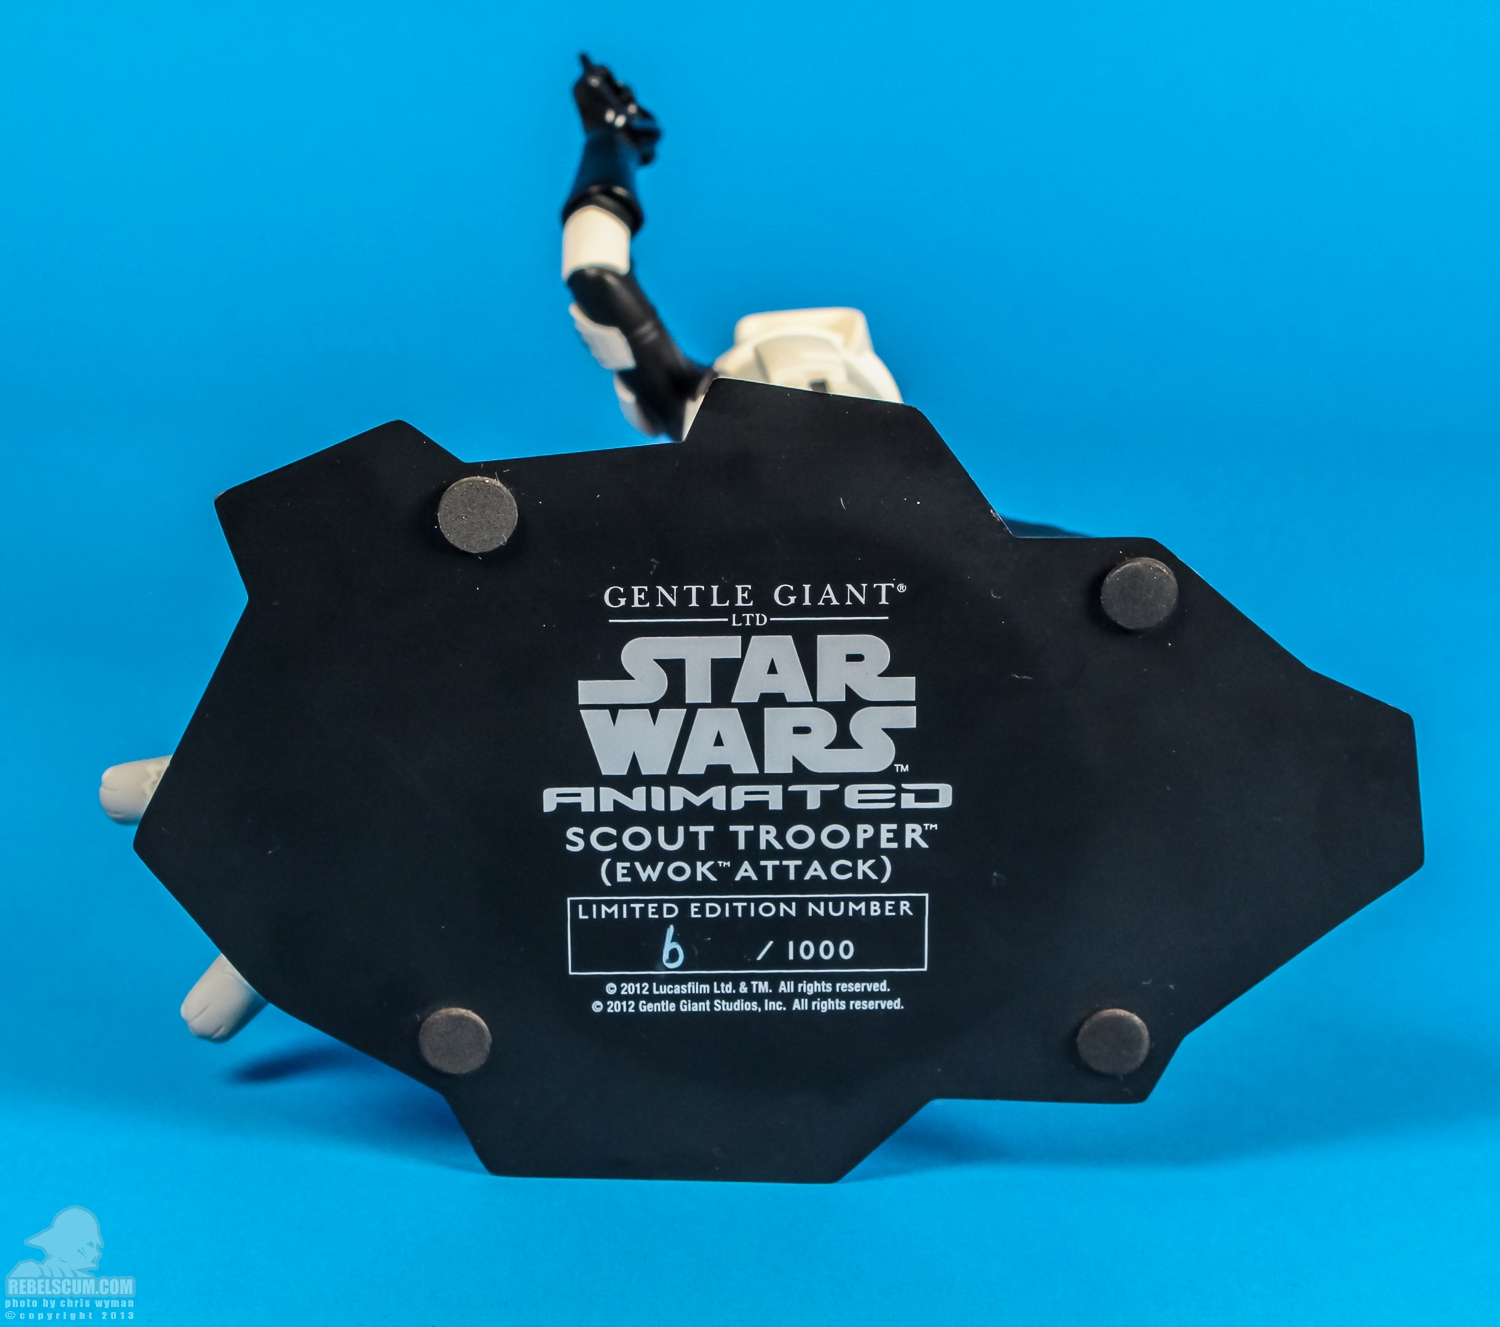 Scout_Trooper_Ewok Attack_Animated_Maquette_Gentle_Giant_Ltd-08.jpg